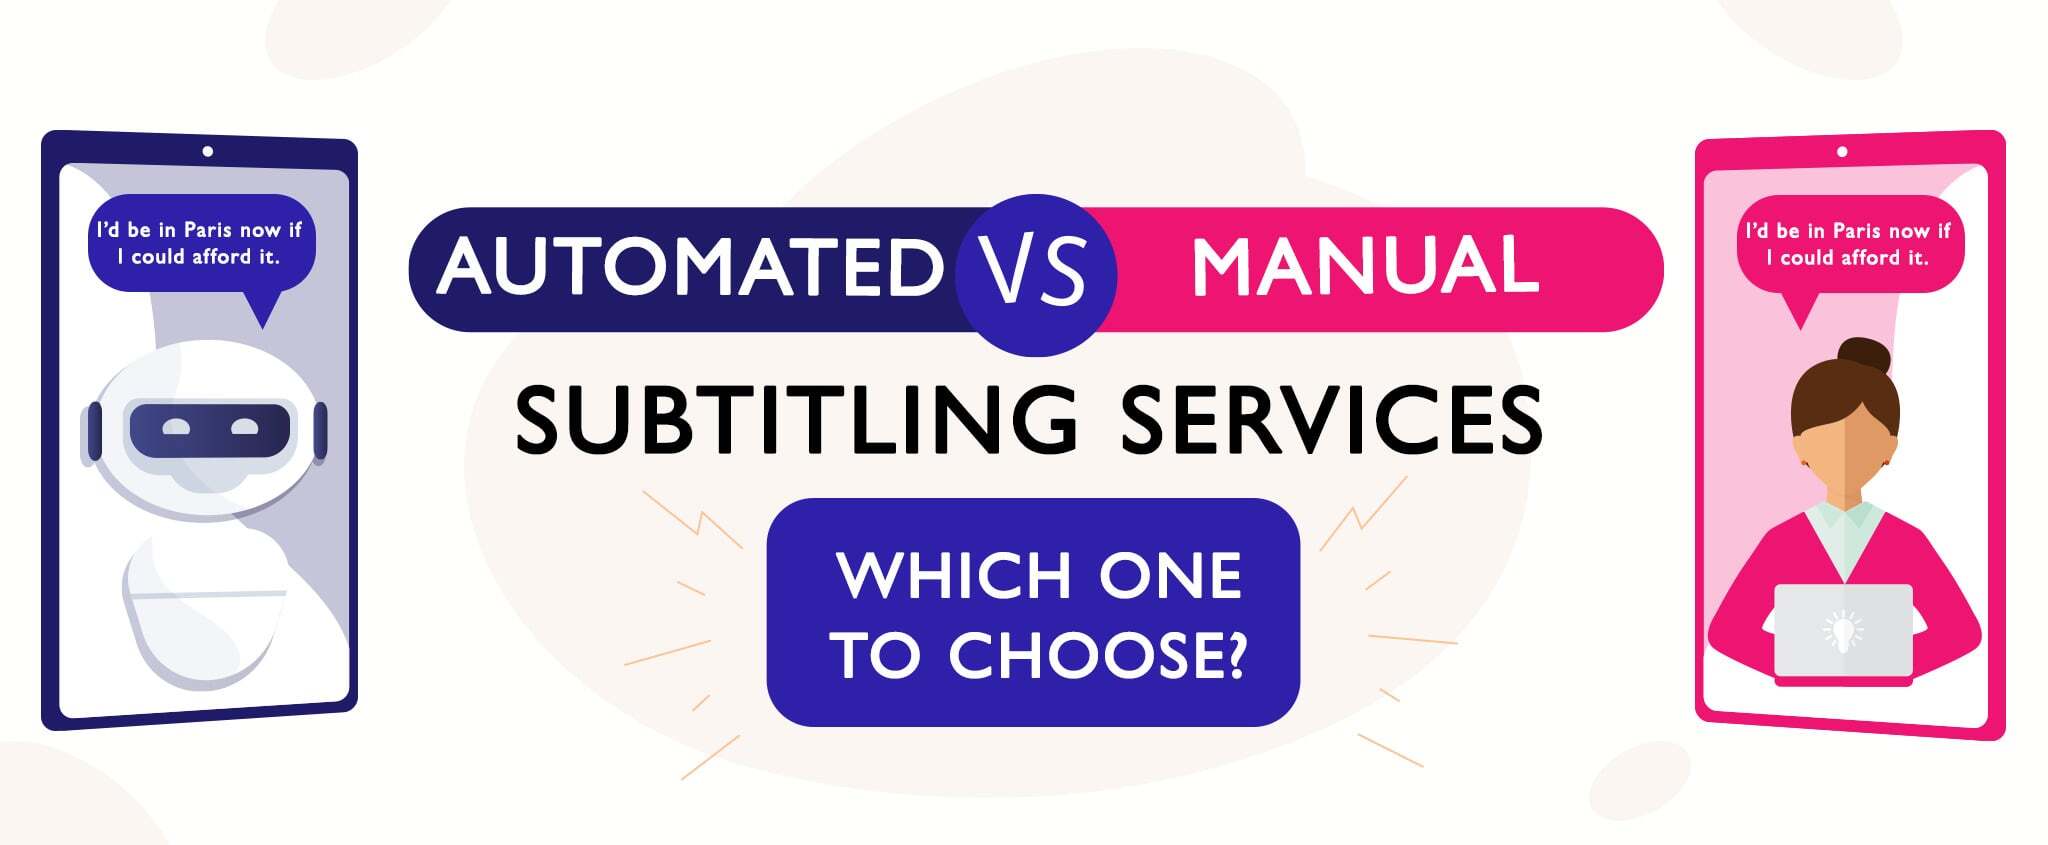 Automated VS Manual Subtitling Services: Which One to Choose?